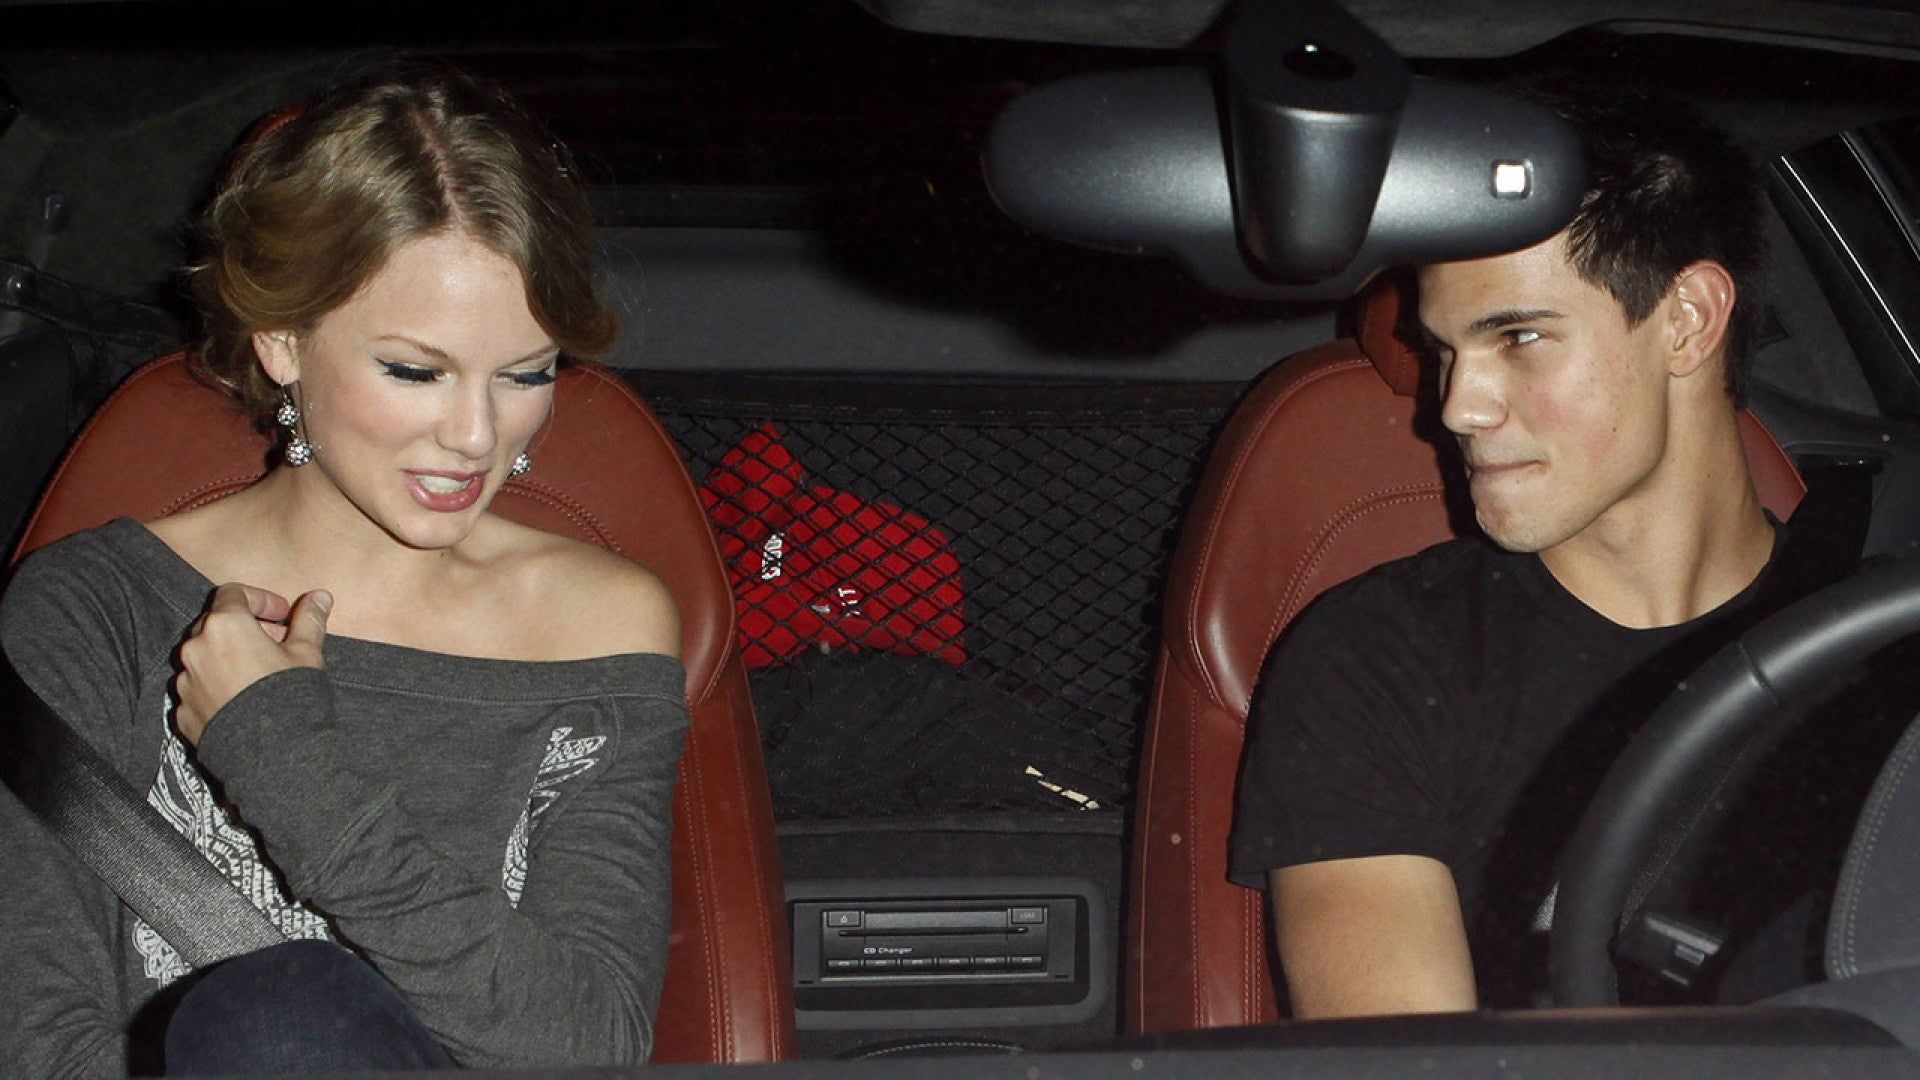 Taylor Swift And Taylor Lautner Driving In A Car